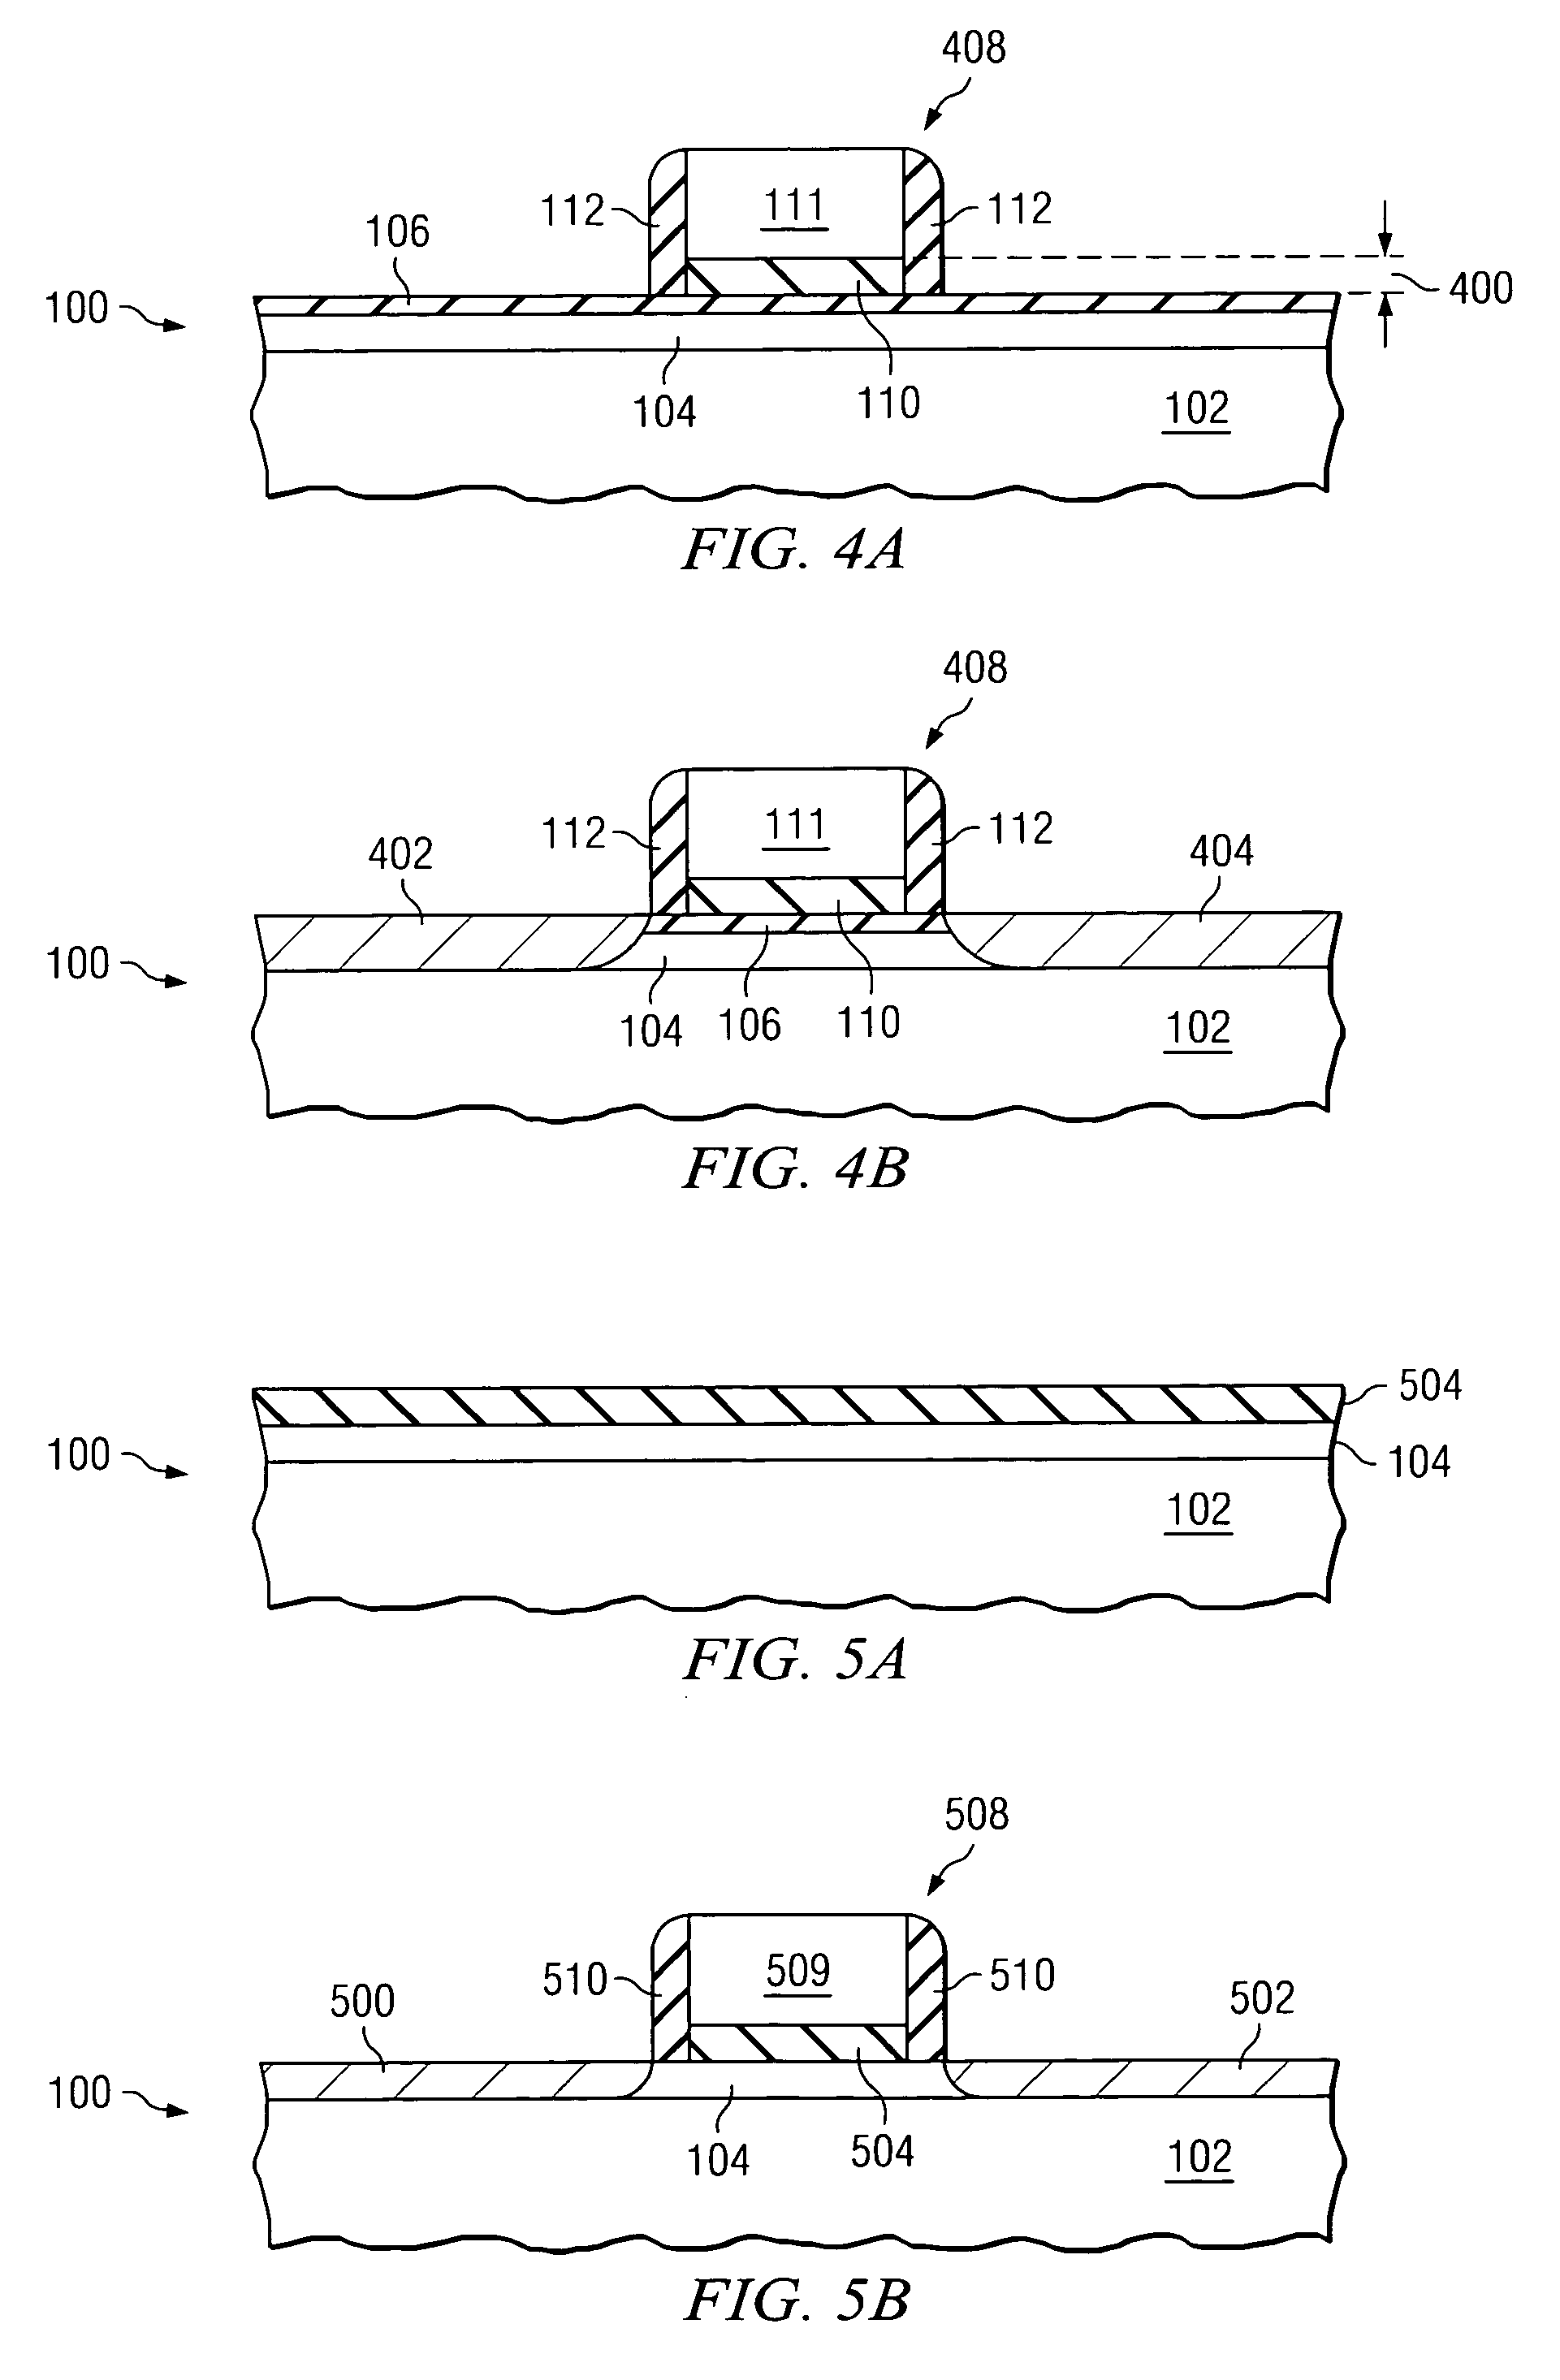 System and method for integrating low schottky barrier metal source/drain